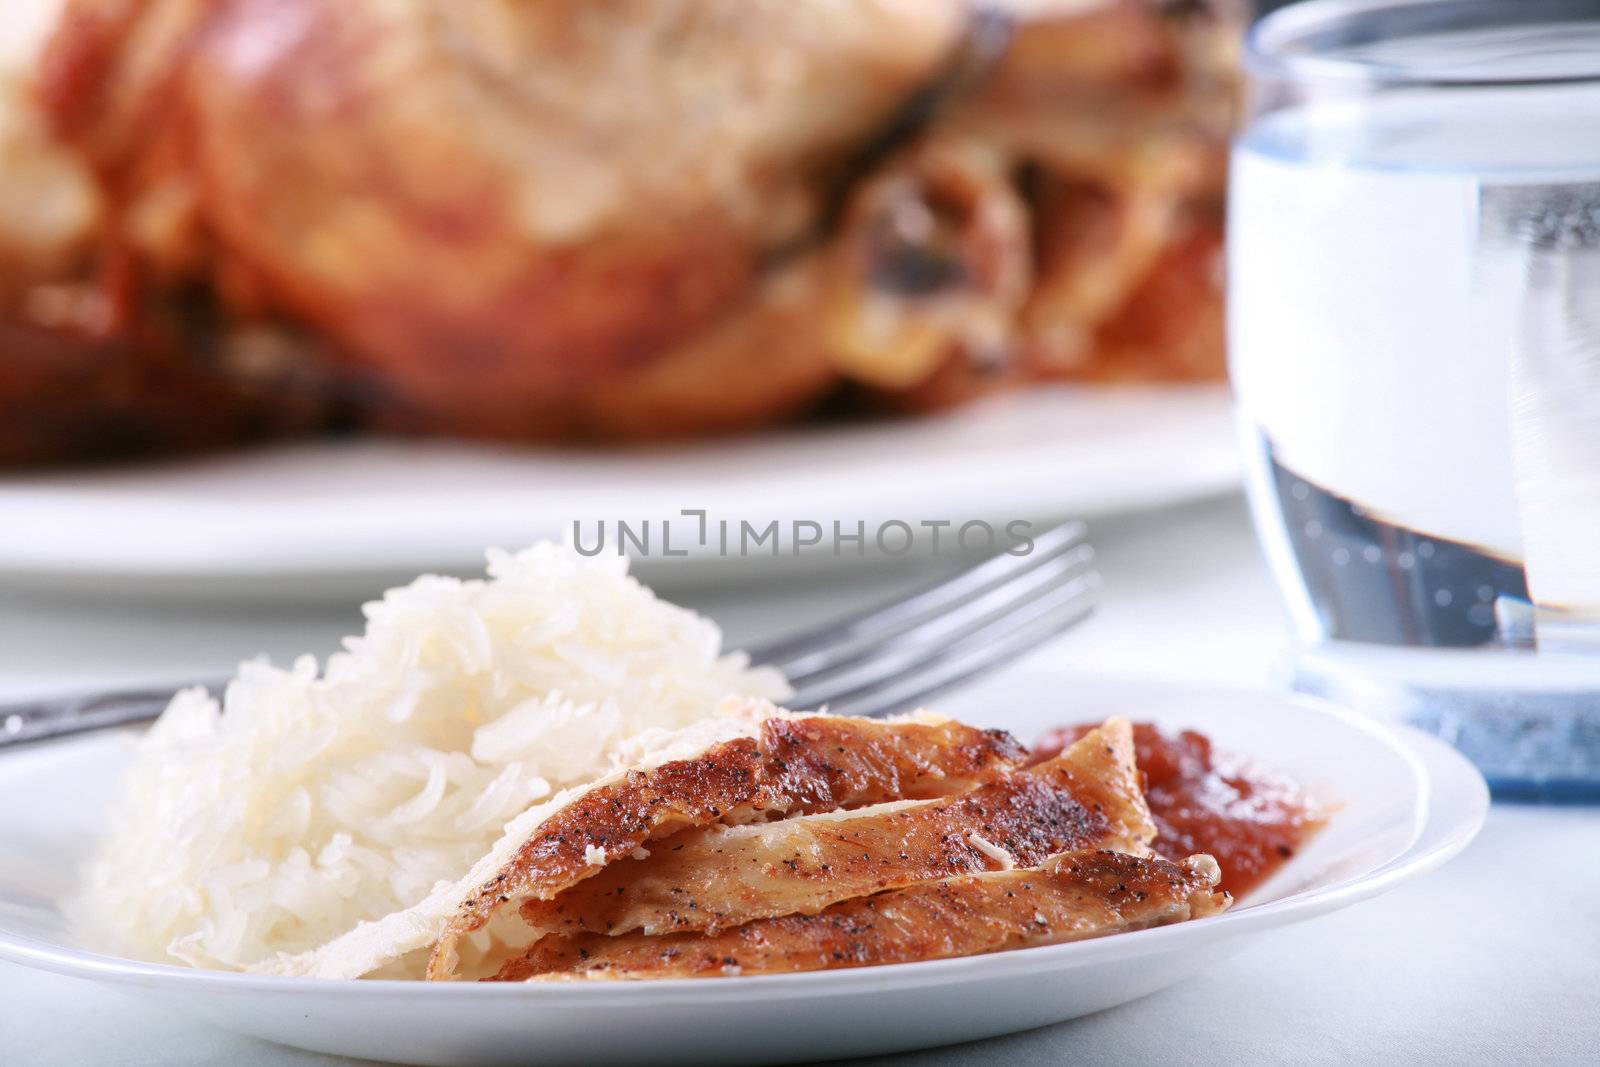 Chicken and rice meal  set on tabletop